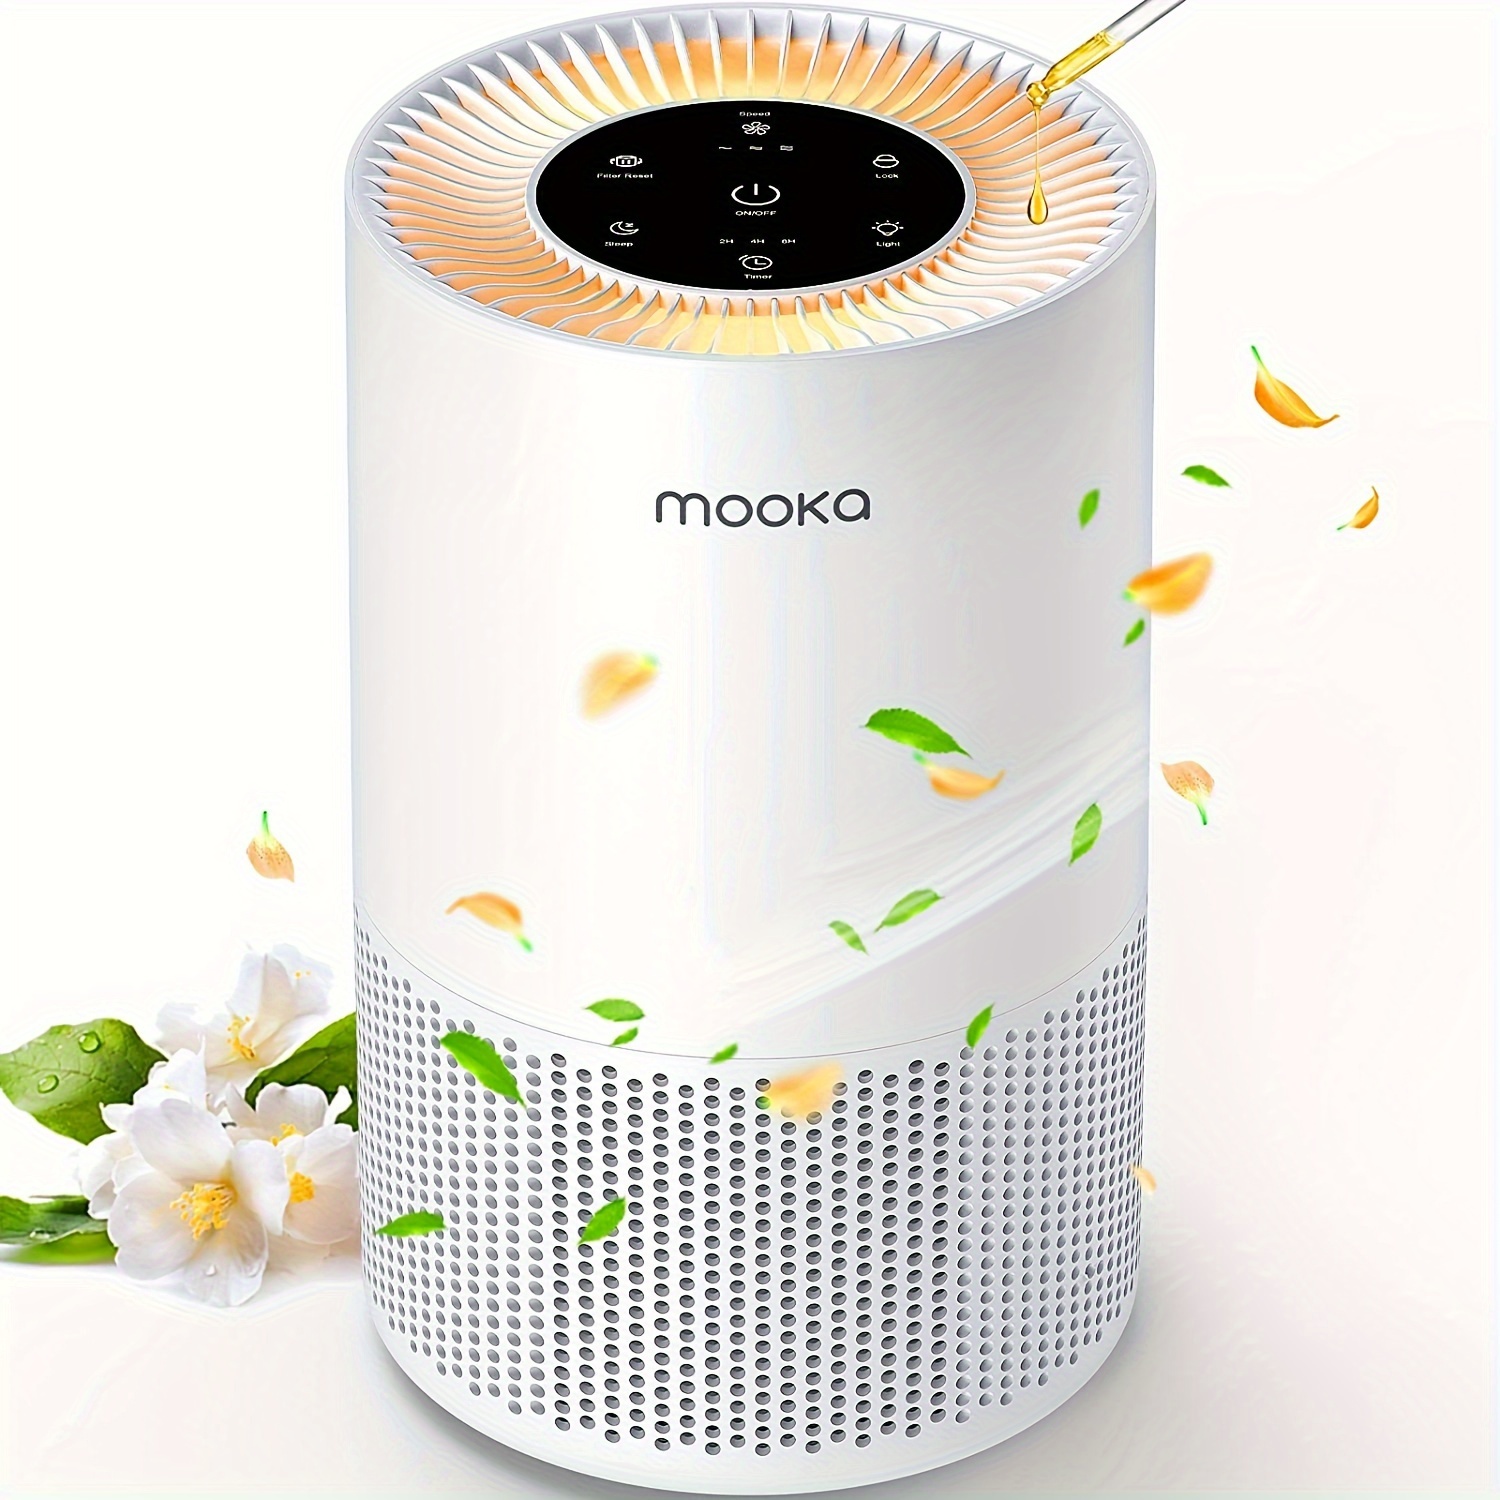 

Air Purifiers For Home Large Rooms Up To 1200ft², Mooka H13 True Hepa For Bedroom Pets With Fragrance Sponge, Timer, Air Filter Cleaner For Dust, Odor, Dander, Pollen (white)